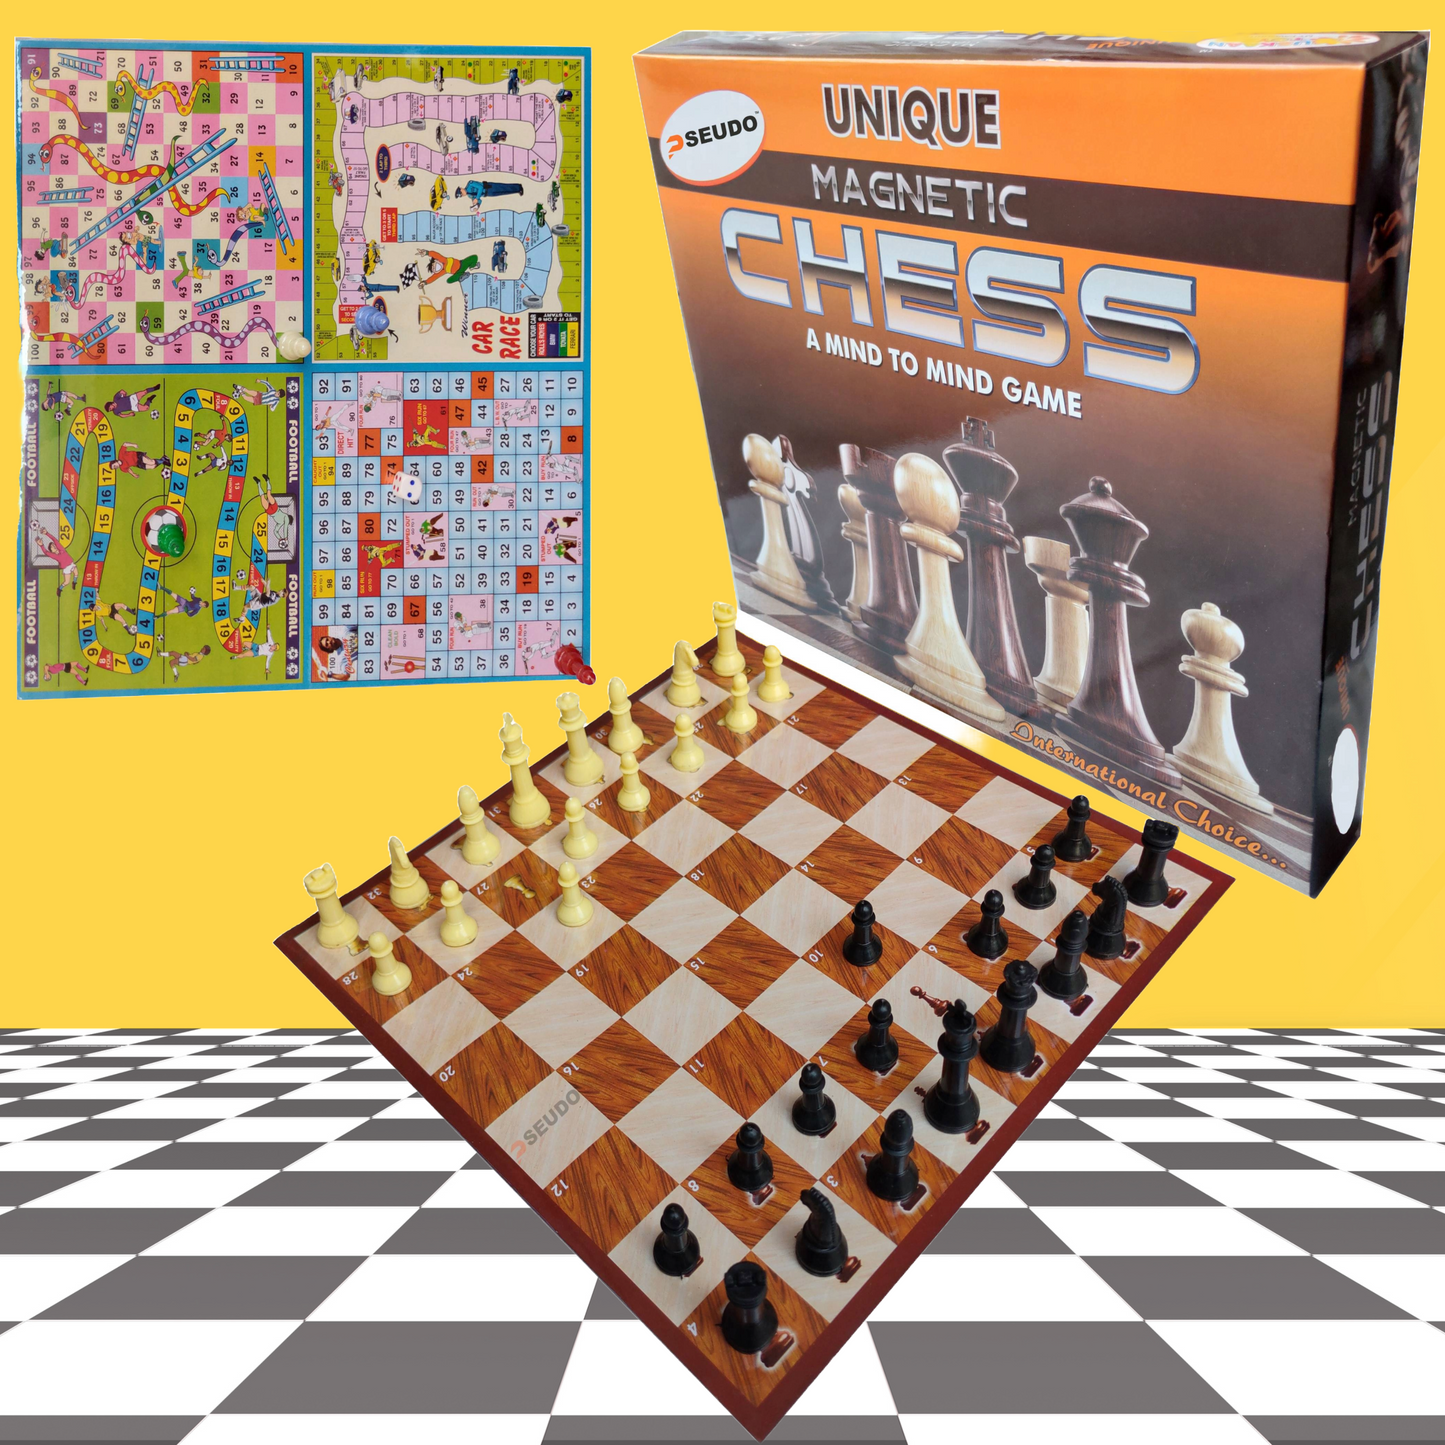 Unique Magnetic Chess, Board Games For Kids